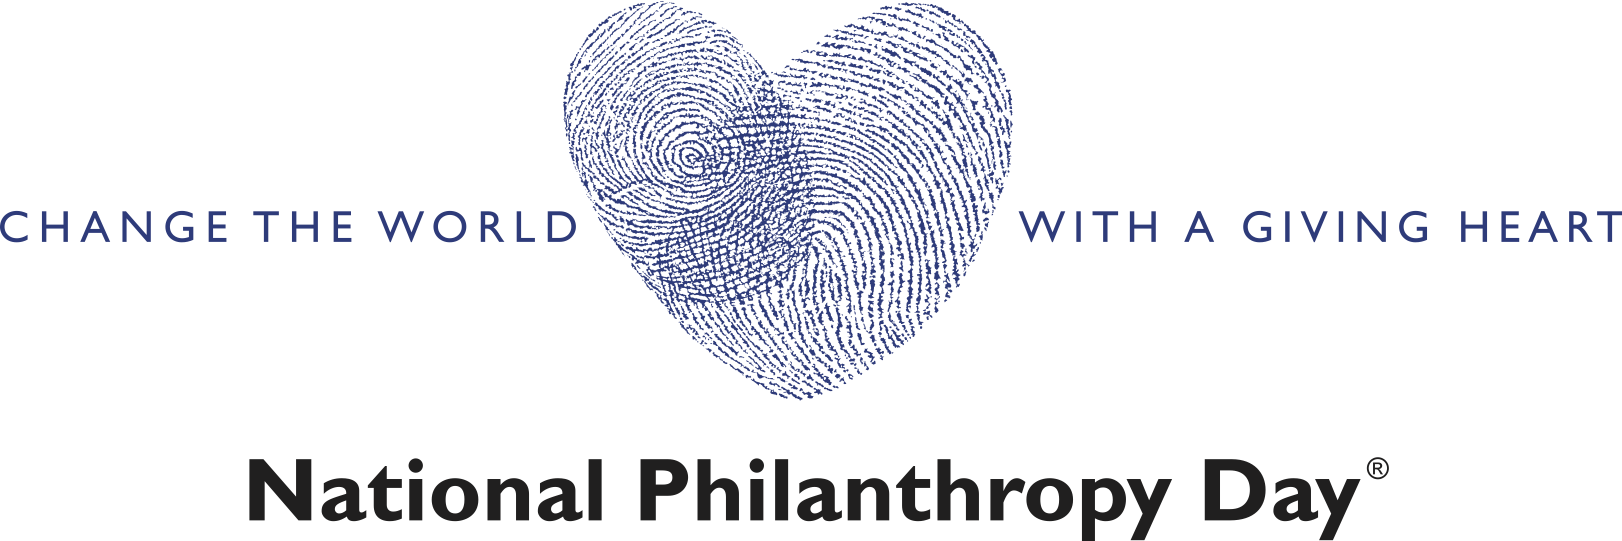 2021 National Philanthropy Day® and Generosity of Spirit™ Awards Luncheon Tickets